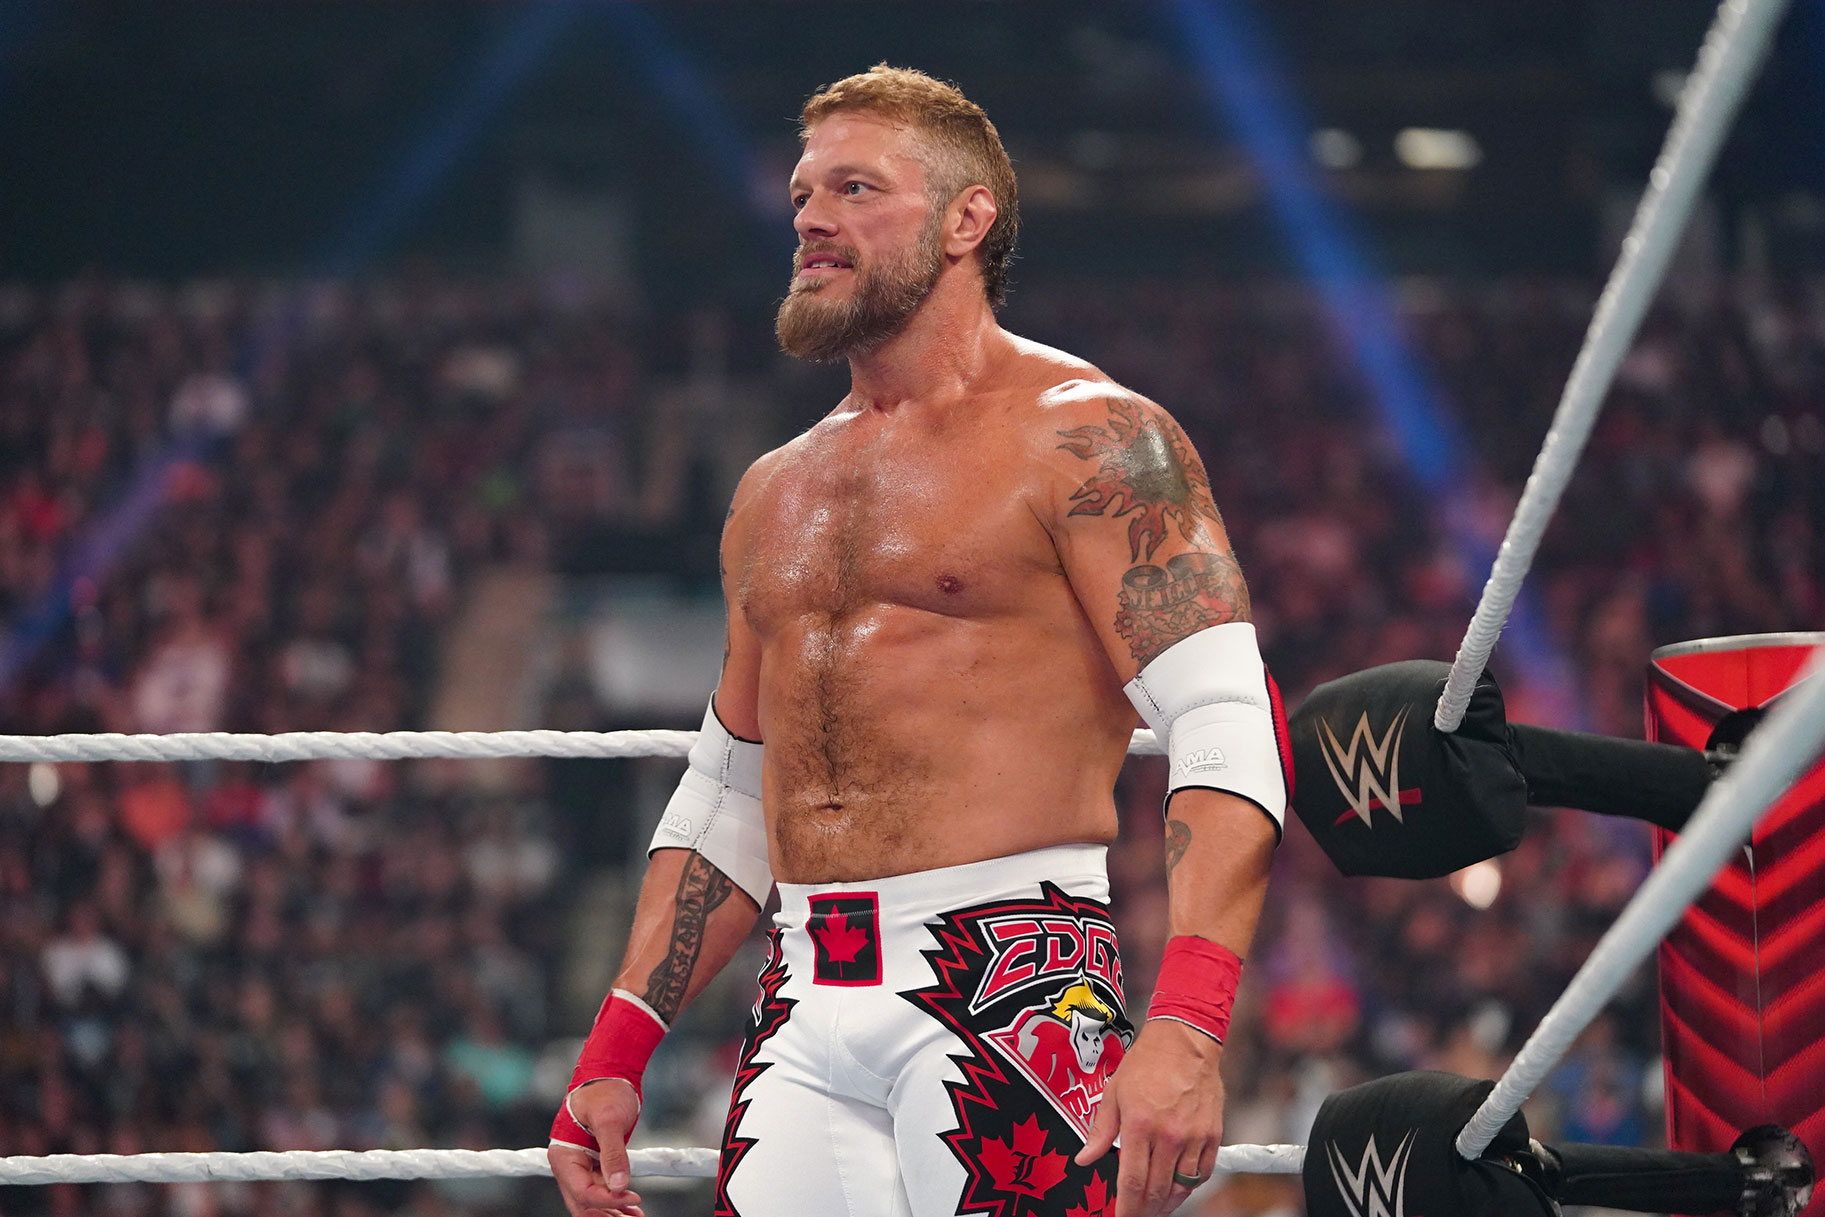 Edge May Be Retiring From WWE But He's Had A Long Career So Far | USA Insider